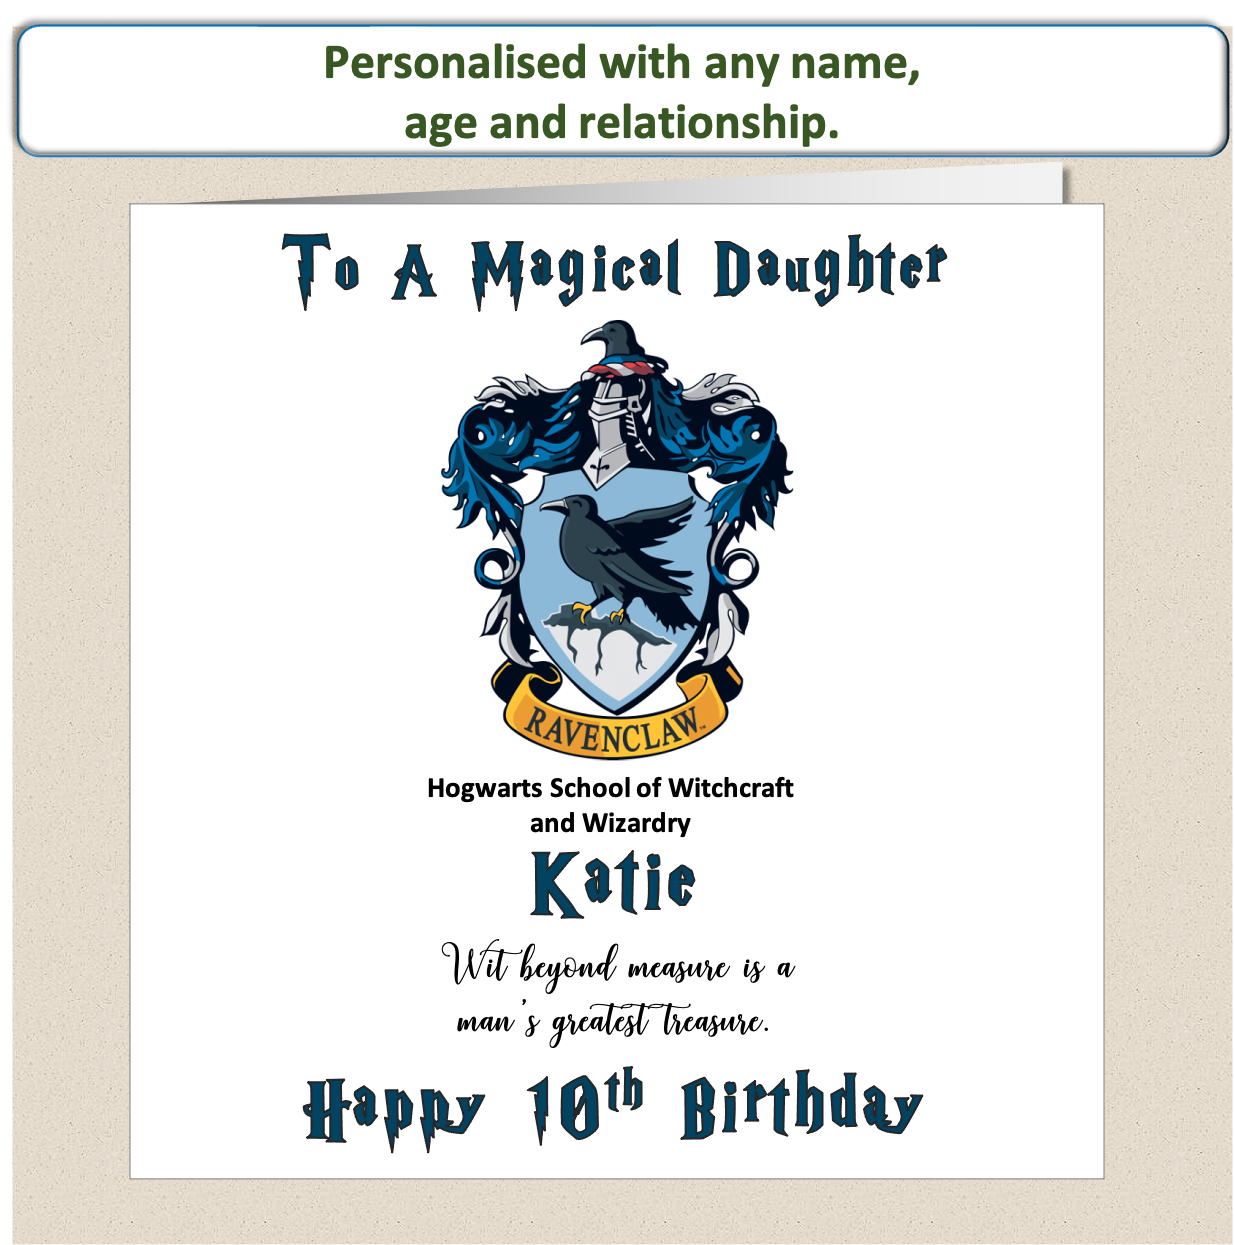 Personalised Ravenclaw (Harry Potter Inspired) Birthday Card Kids